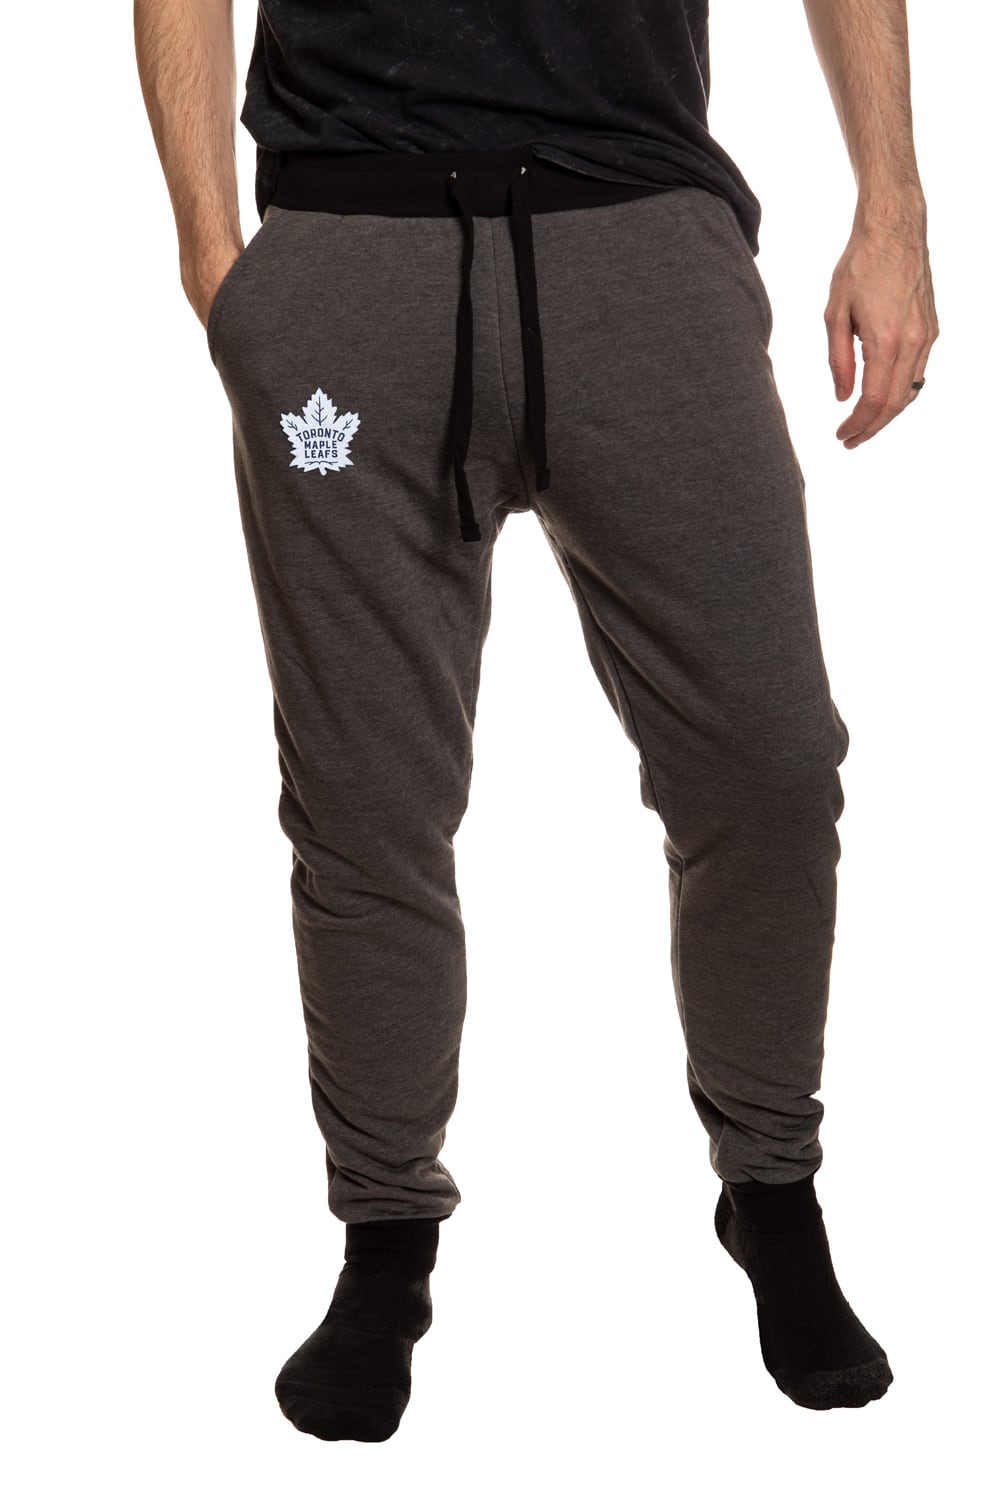 Toronto Maple Leafs Sherpa Lined Sweatpants with Pockets